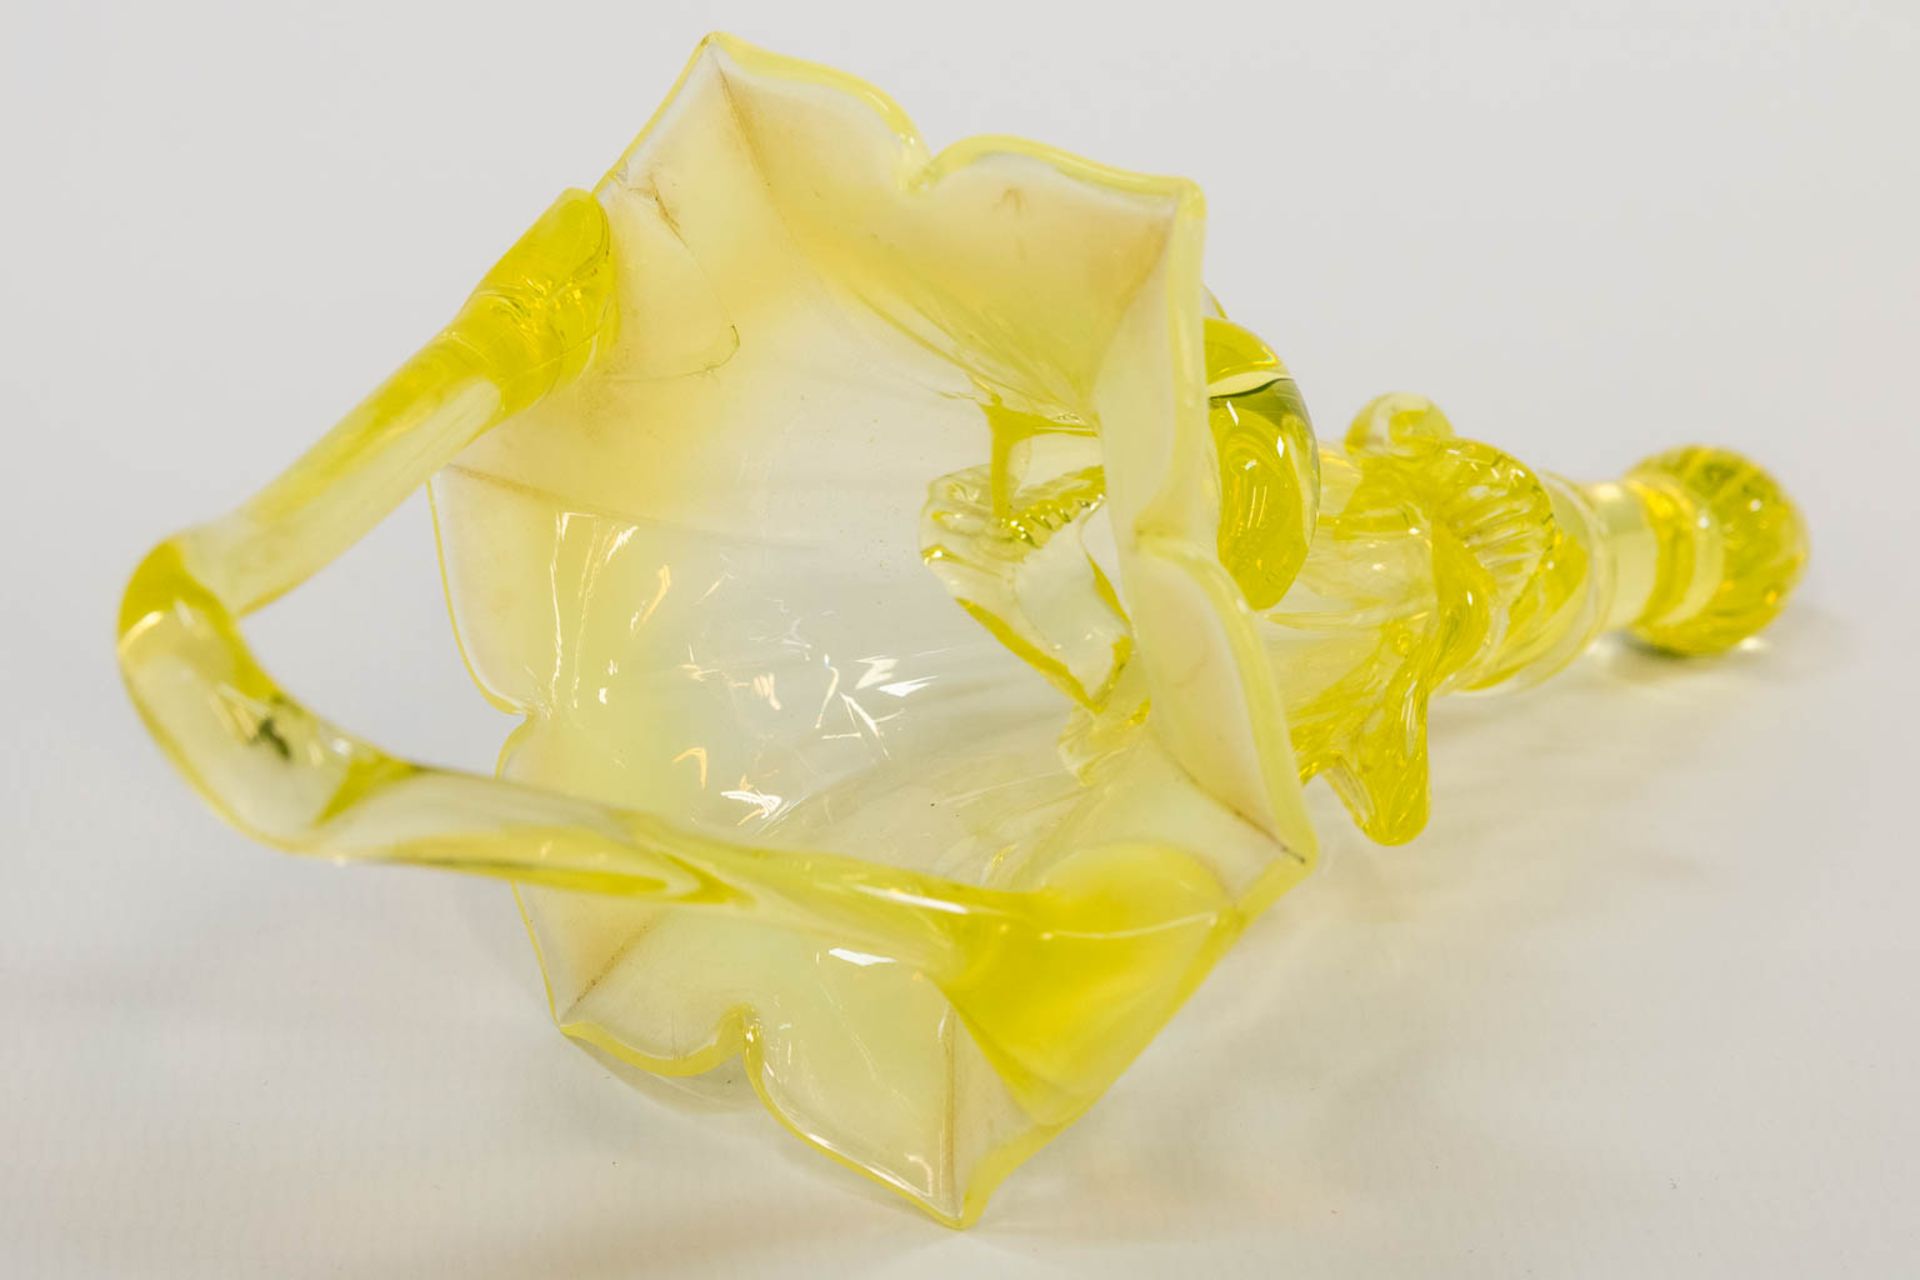 A yellow and clear glass table centrepiece pic-fleur, made in Murano, Italy. (25 x 28 x 45 cm) - Bild 12 aus 15